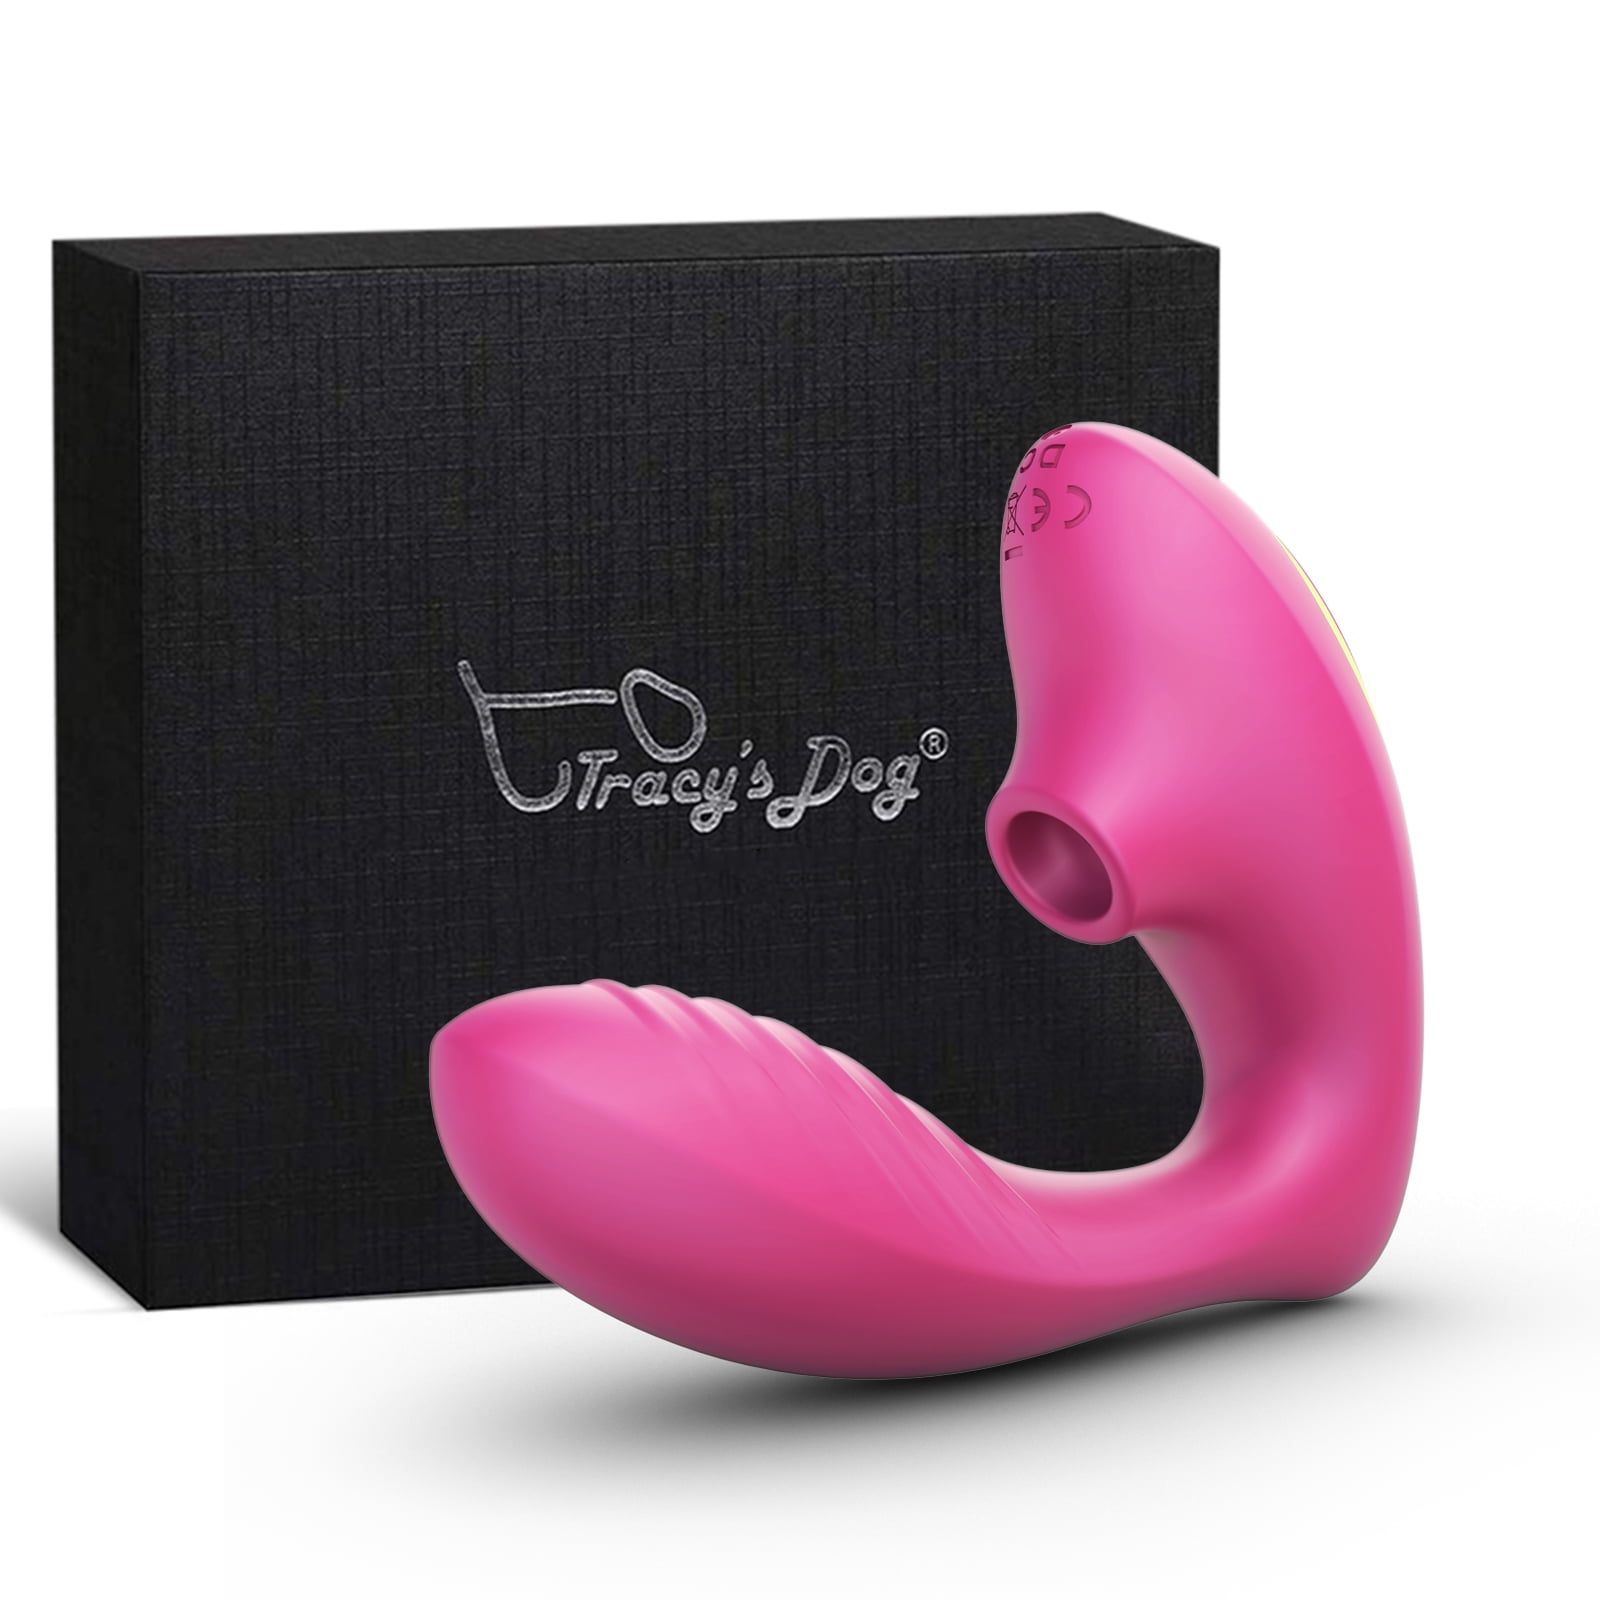 Tracys Dog OG Clitoral Sucking Vibrator for G Spot Clit Stimulator with 10 Suction and Vibration Patterns, Adult Sex Toys for Women, Rose photo